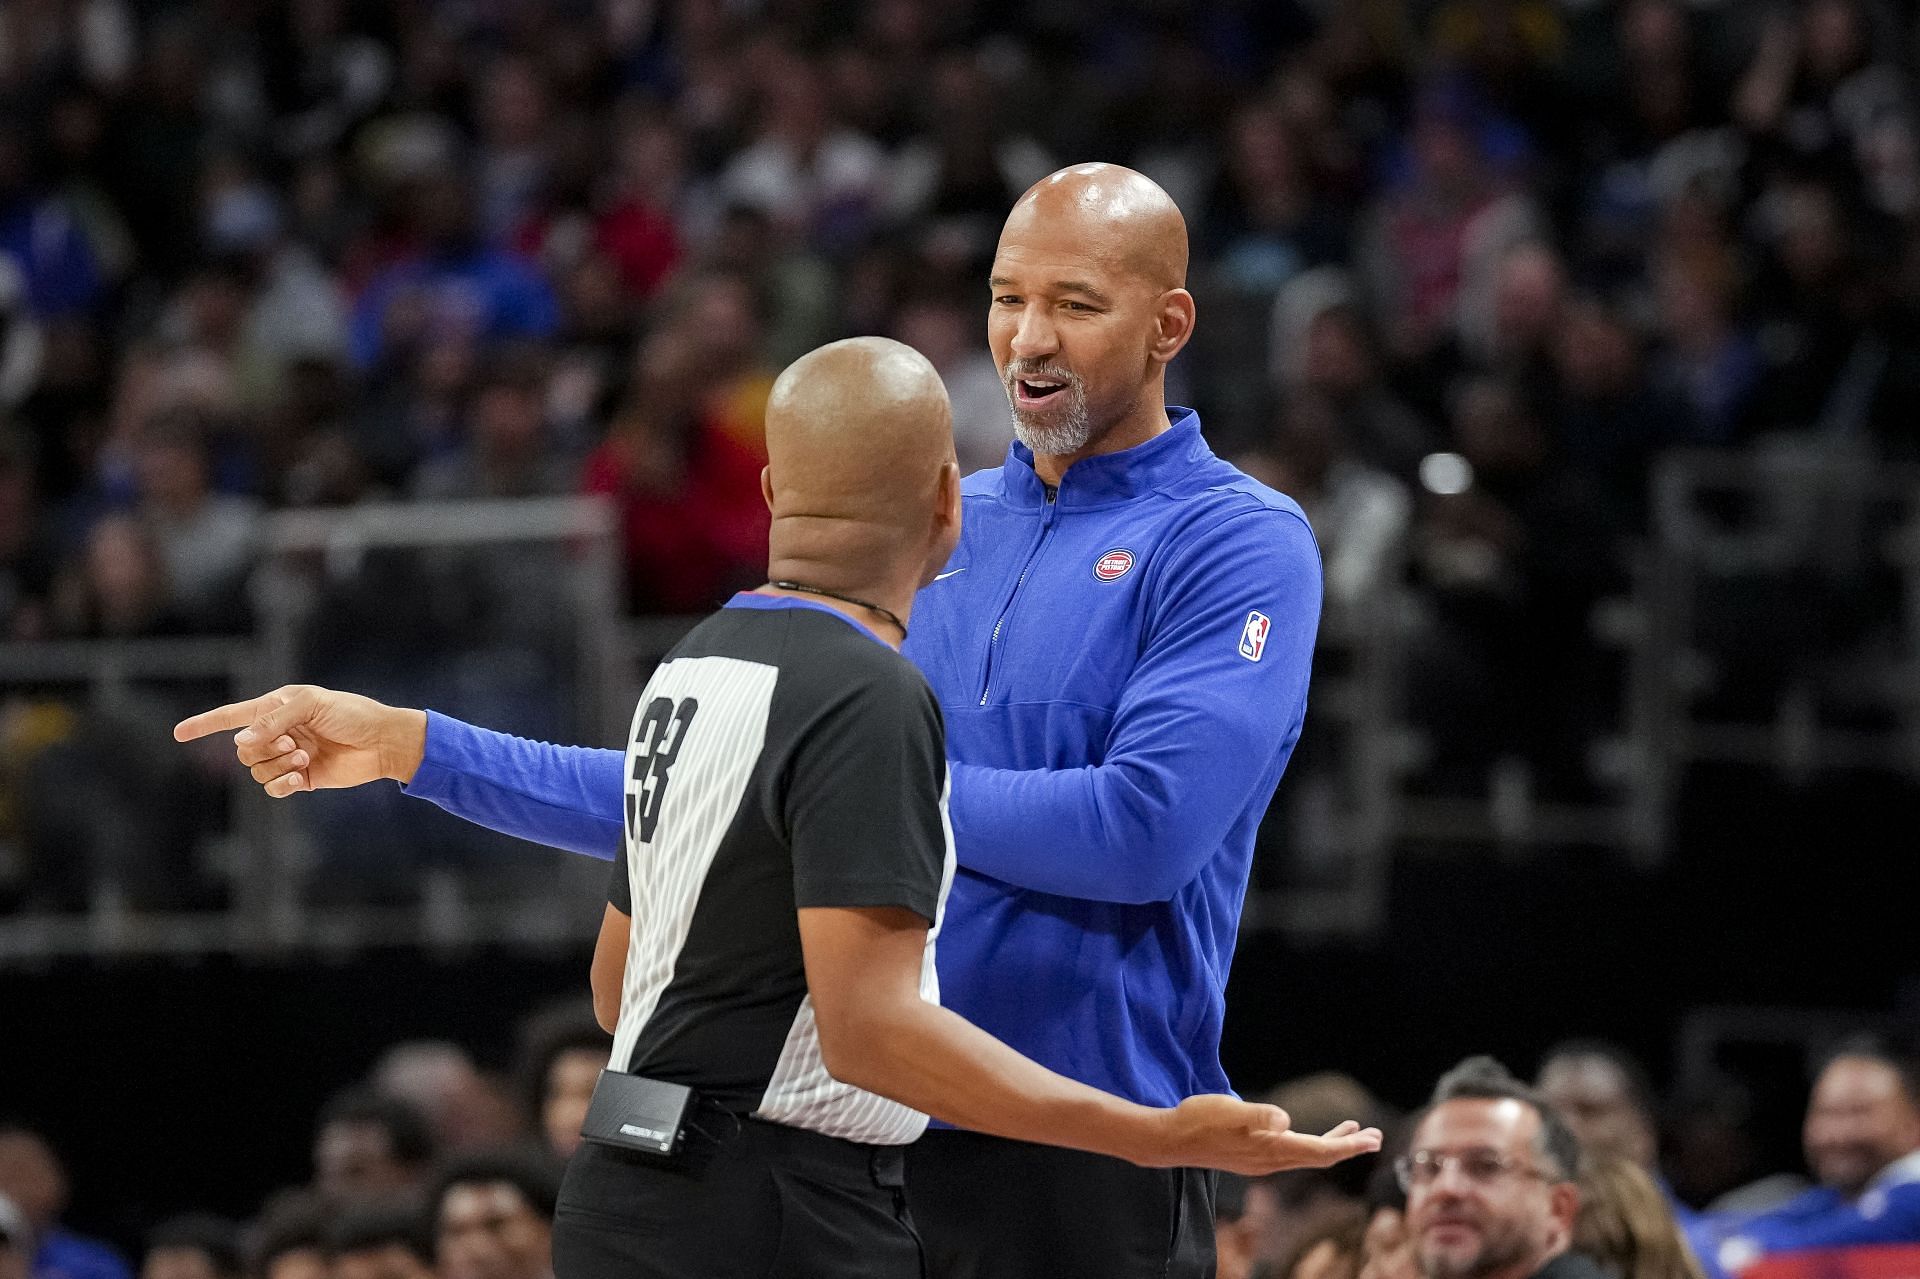 Monty Williams speaks with a referee